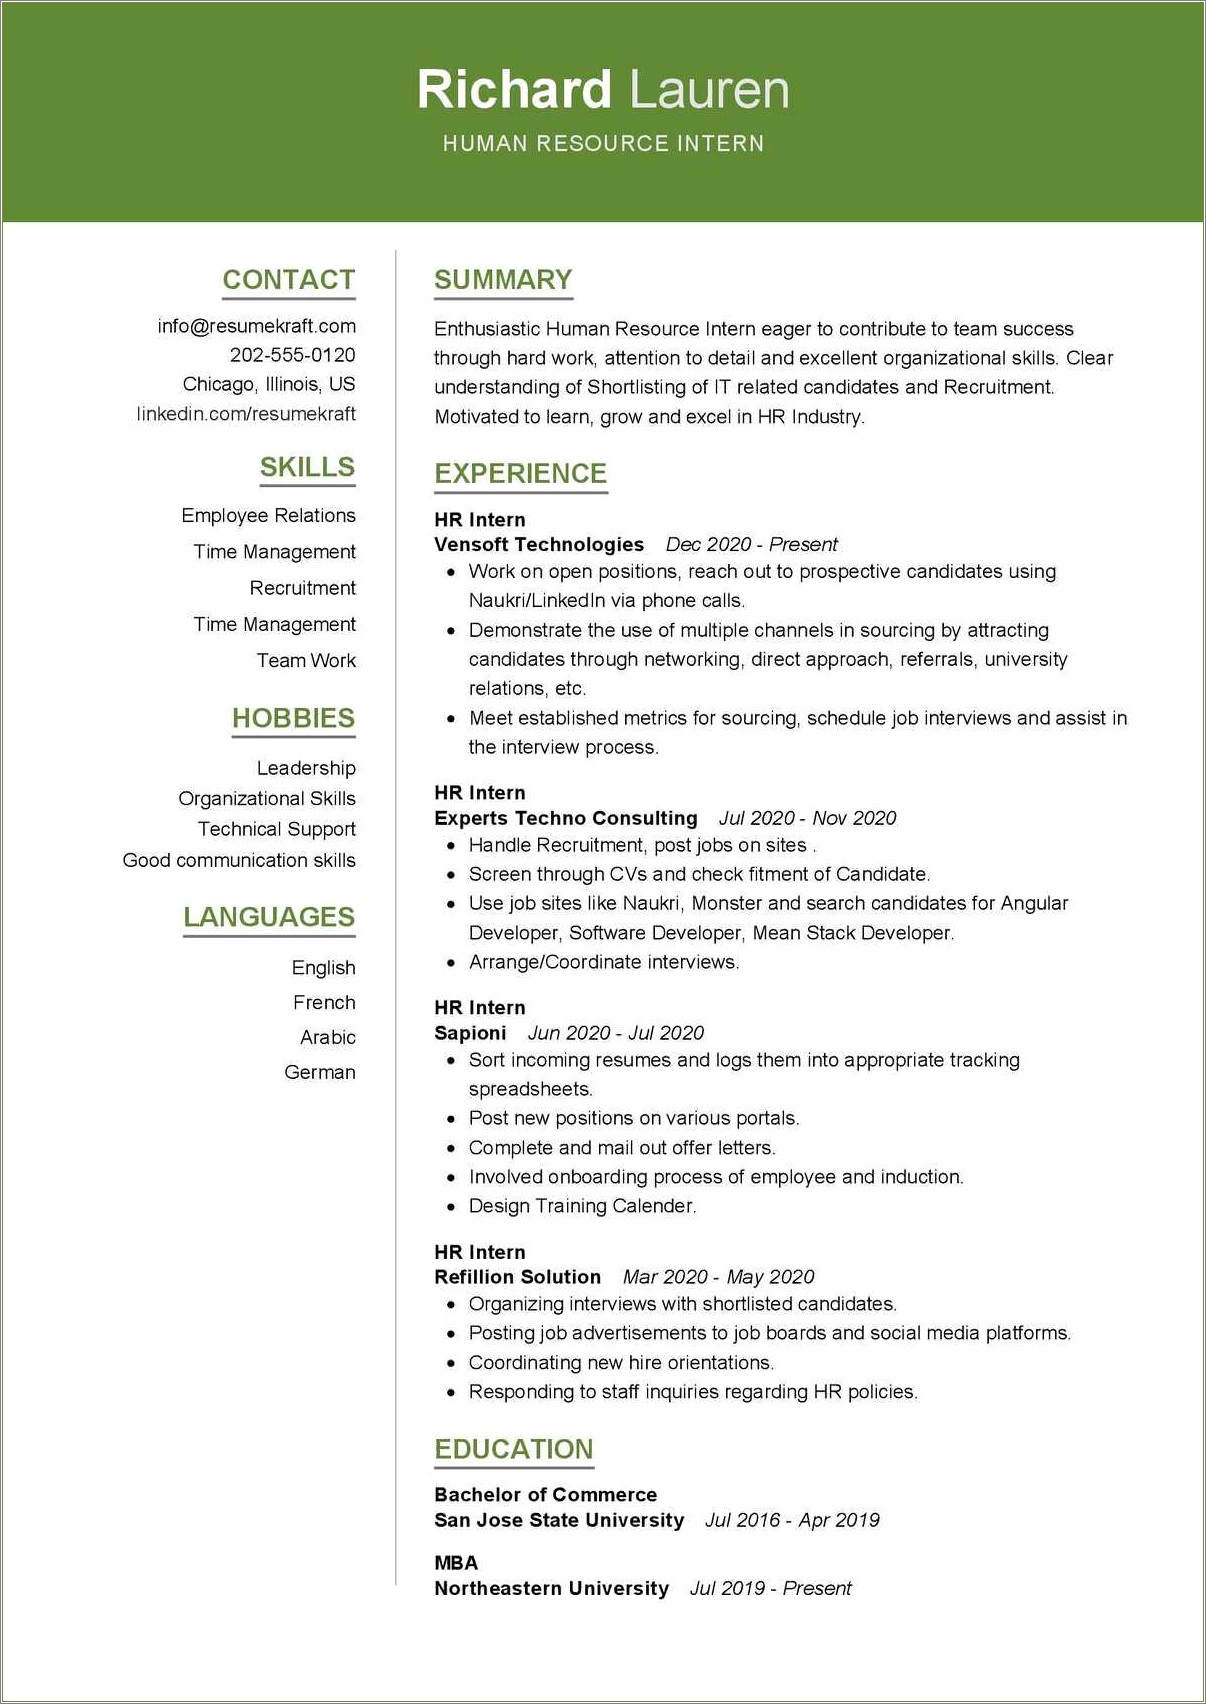 Resume Examples That Include Employment Via Temp Agency